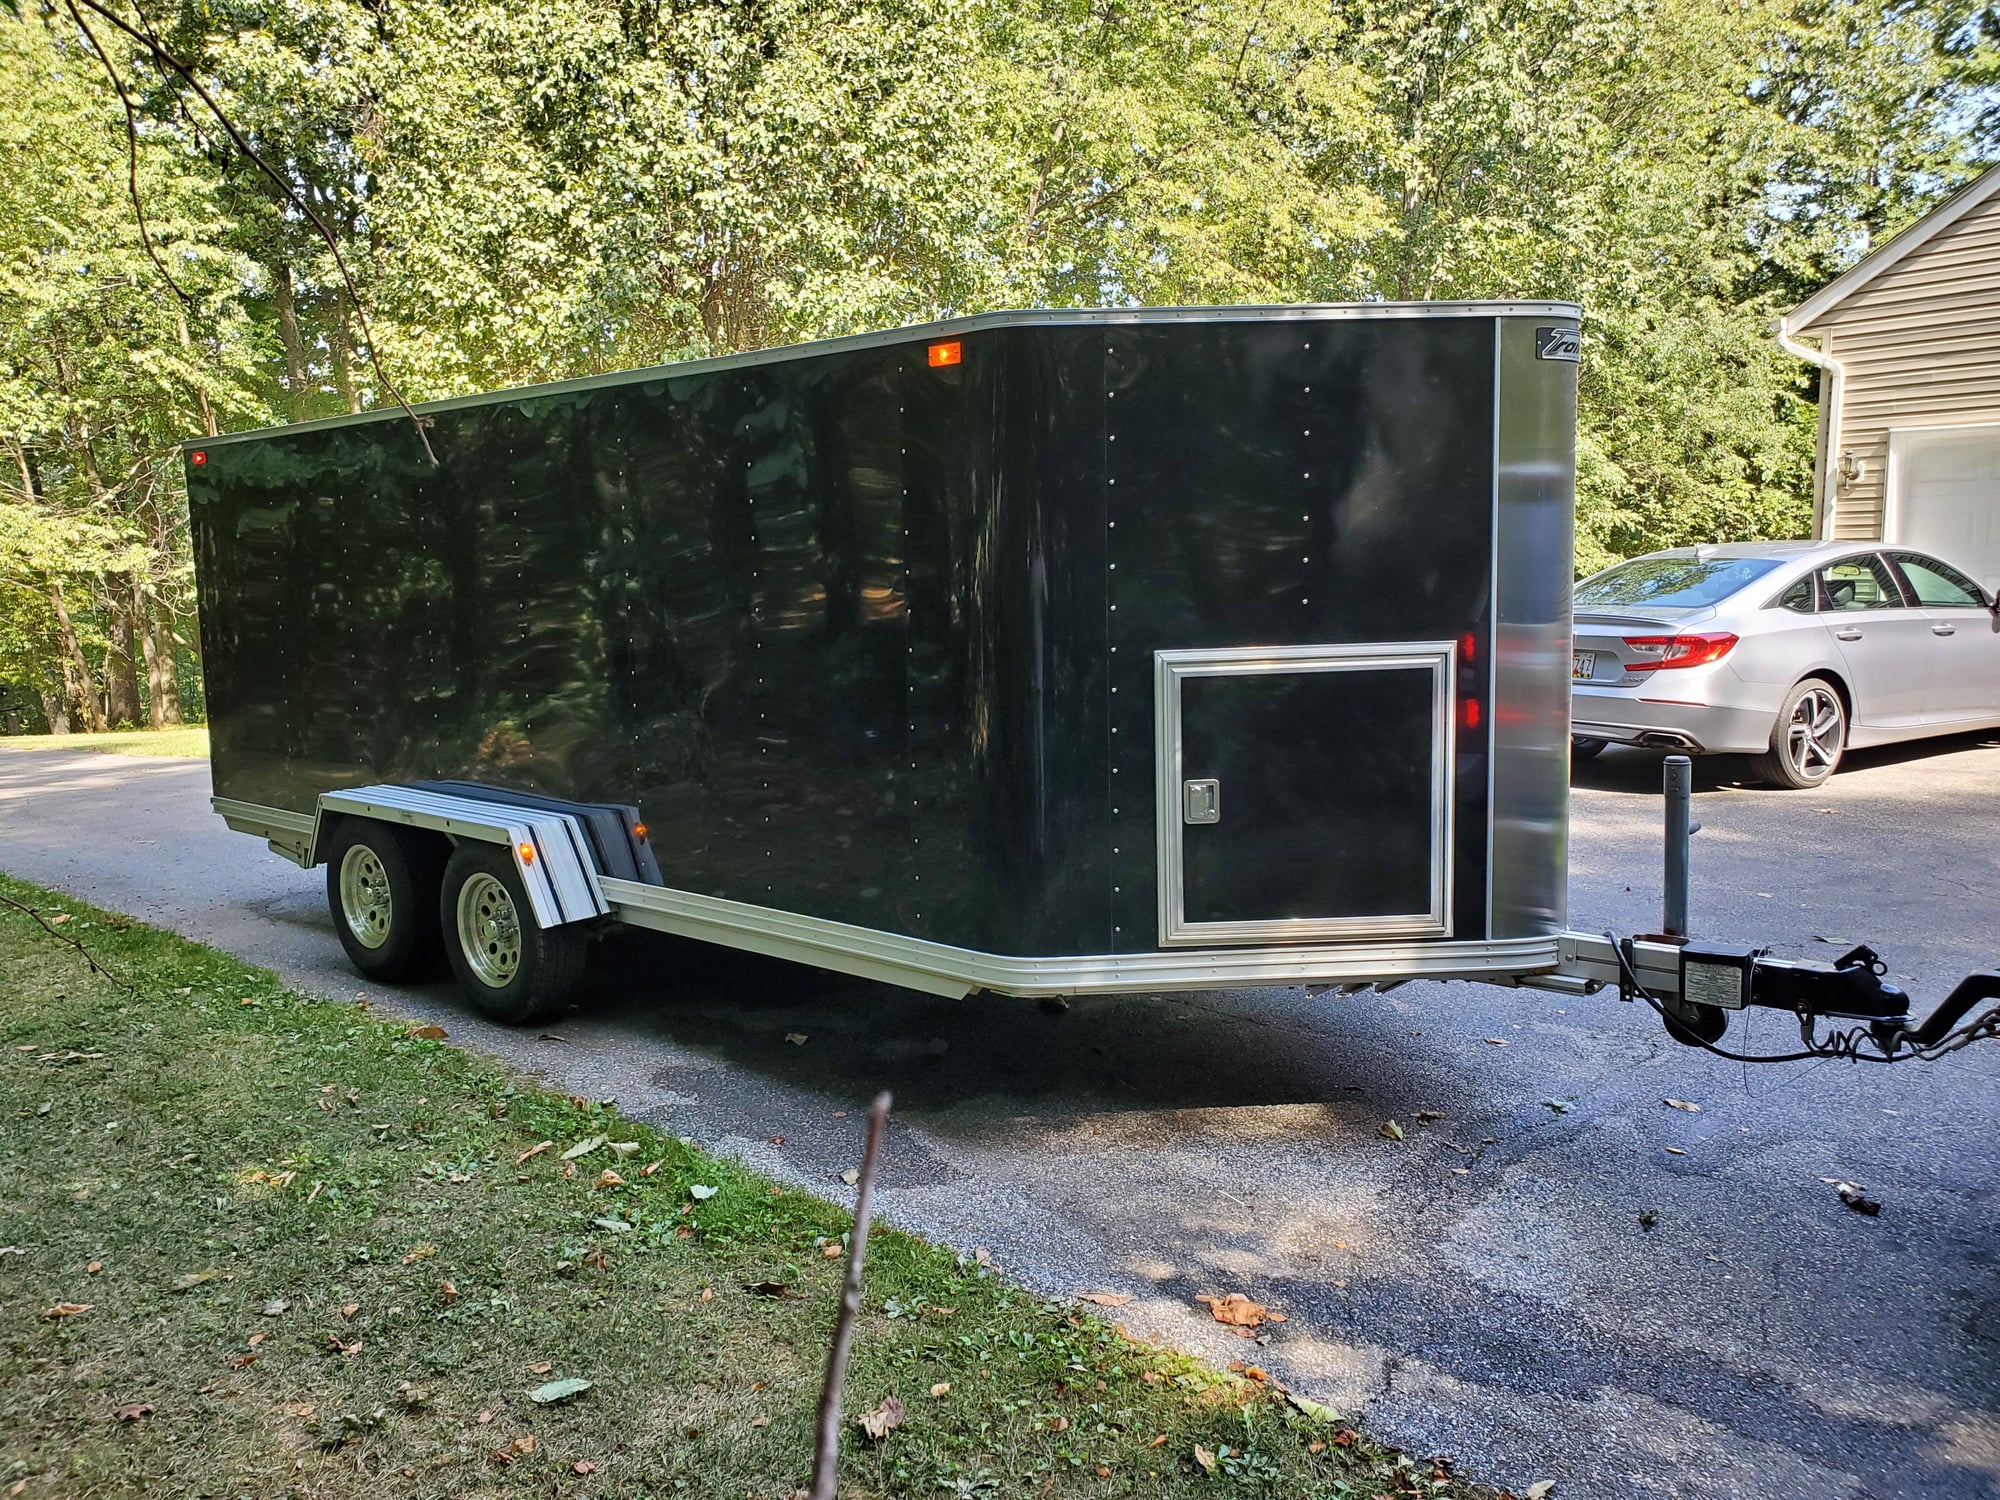 Miscellaneous - 2001 Trailex – Model CTE-1741 - $20,000 - Used - Westminster, MD 21157, United States